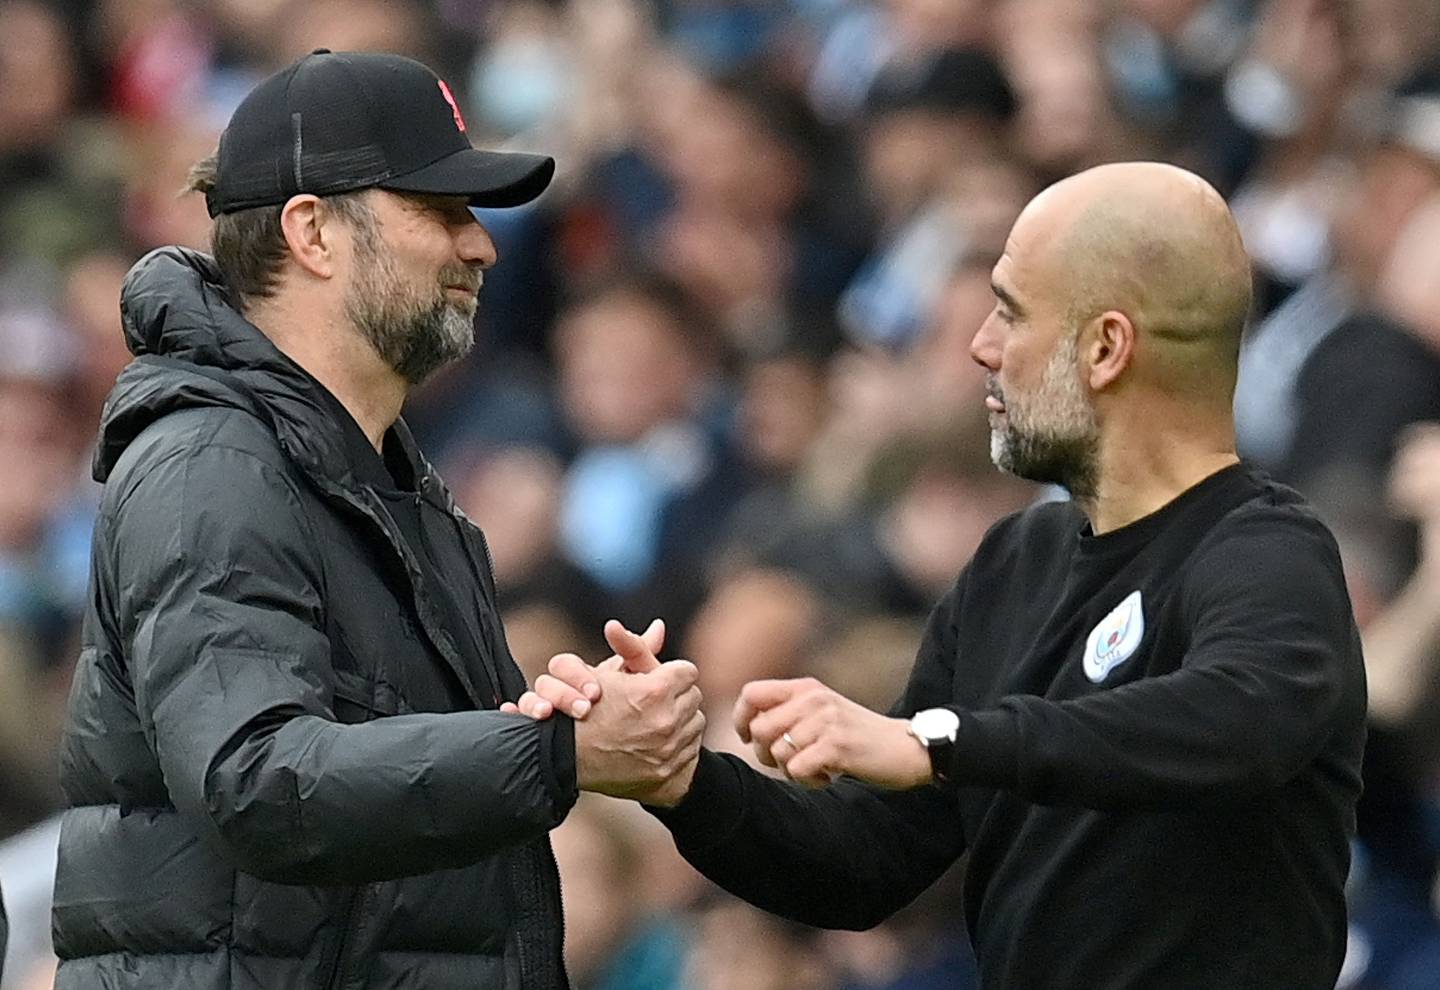 Jurgen Klopp and Pep Guardiola have developed strong bonds with their players and fans. Erik Ten Hag will need to achieve similar. AFP  